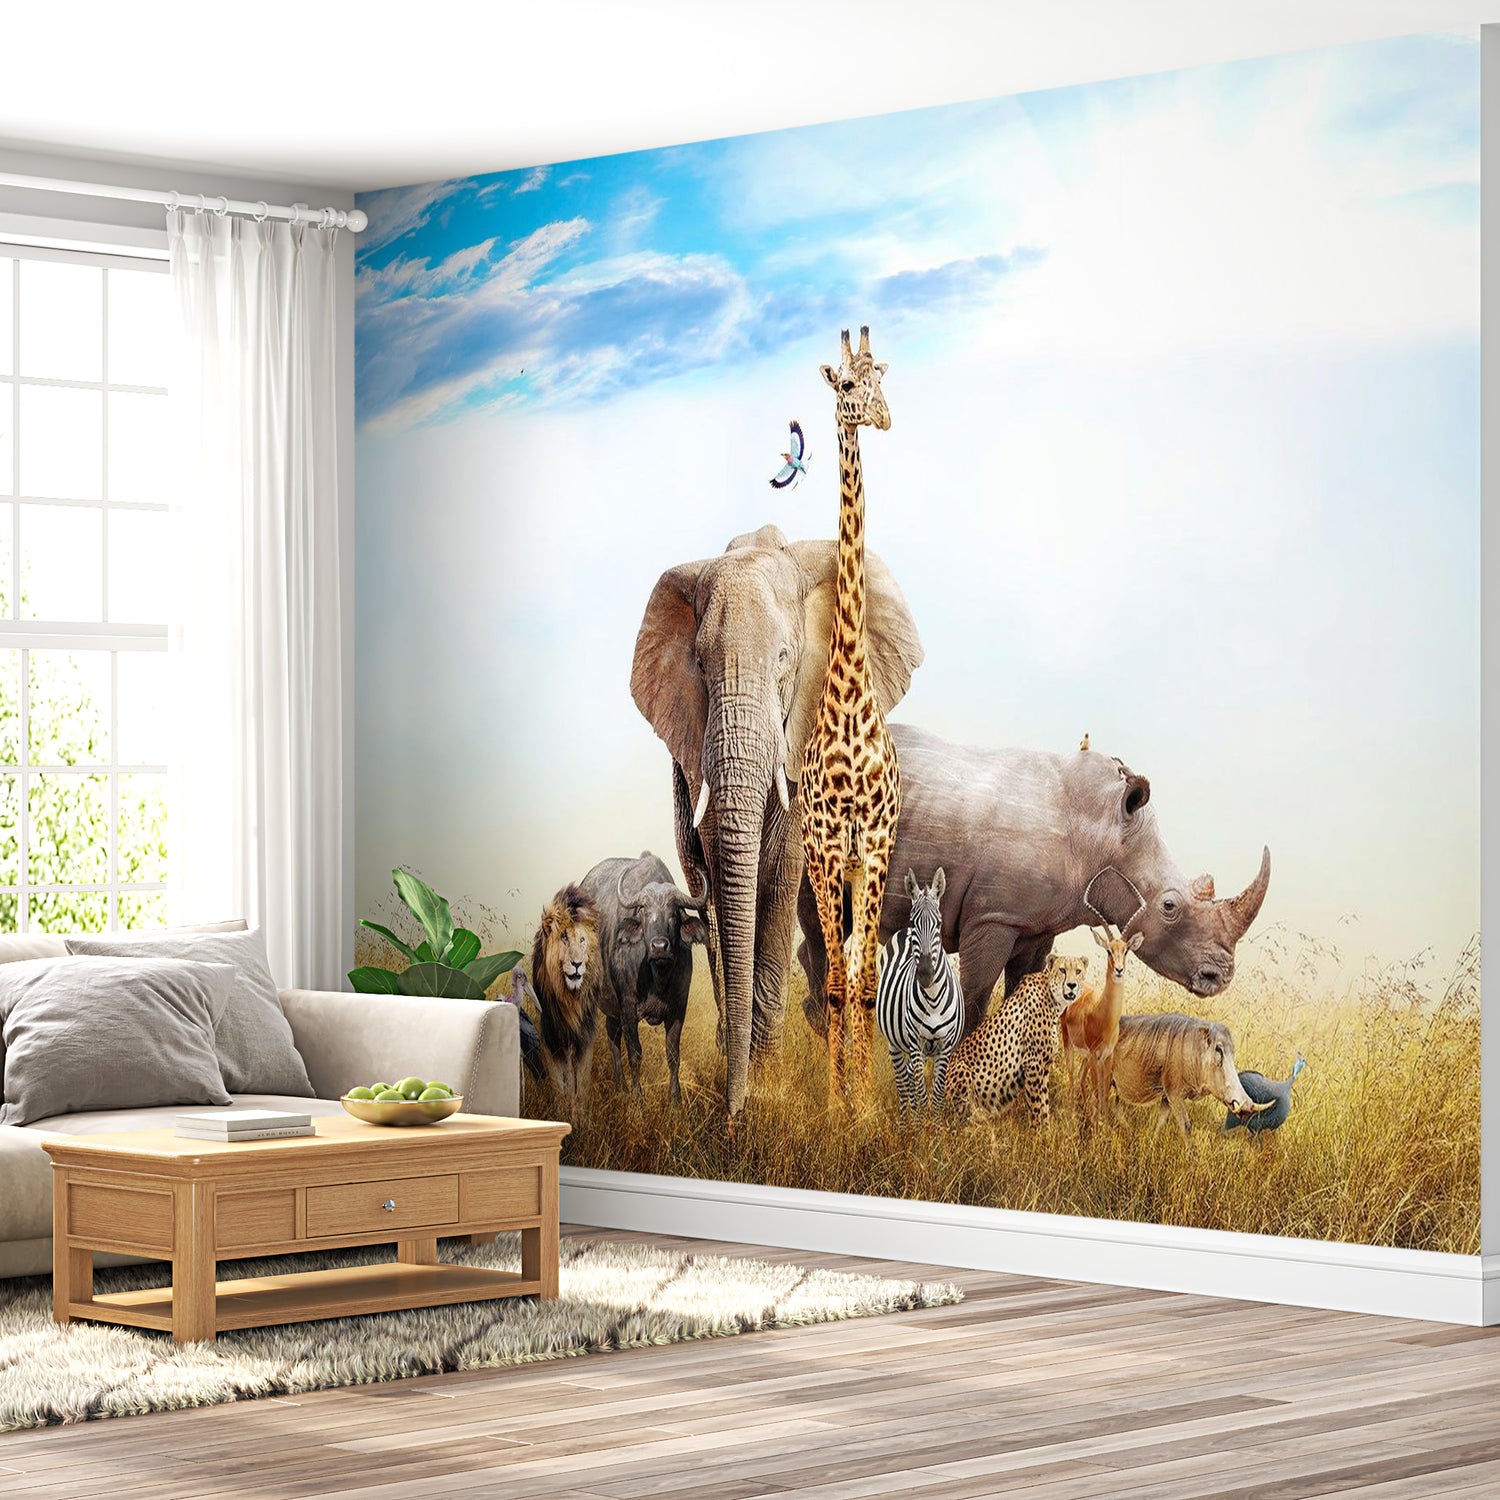 Peel & Stick Animal Wall Mural - Wild African Animals - Removable Wall Decals